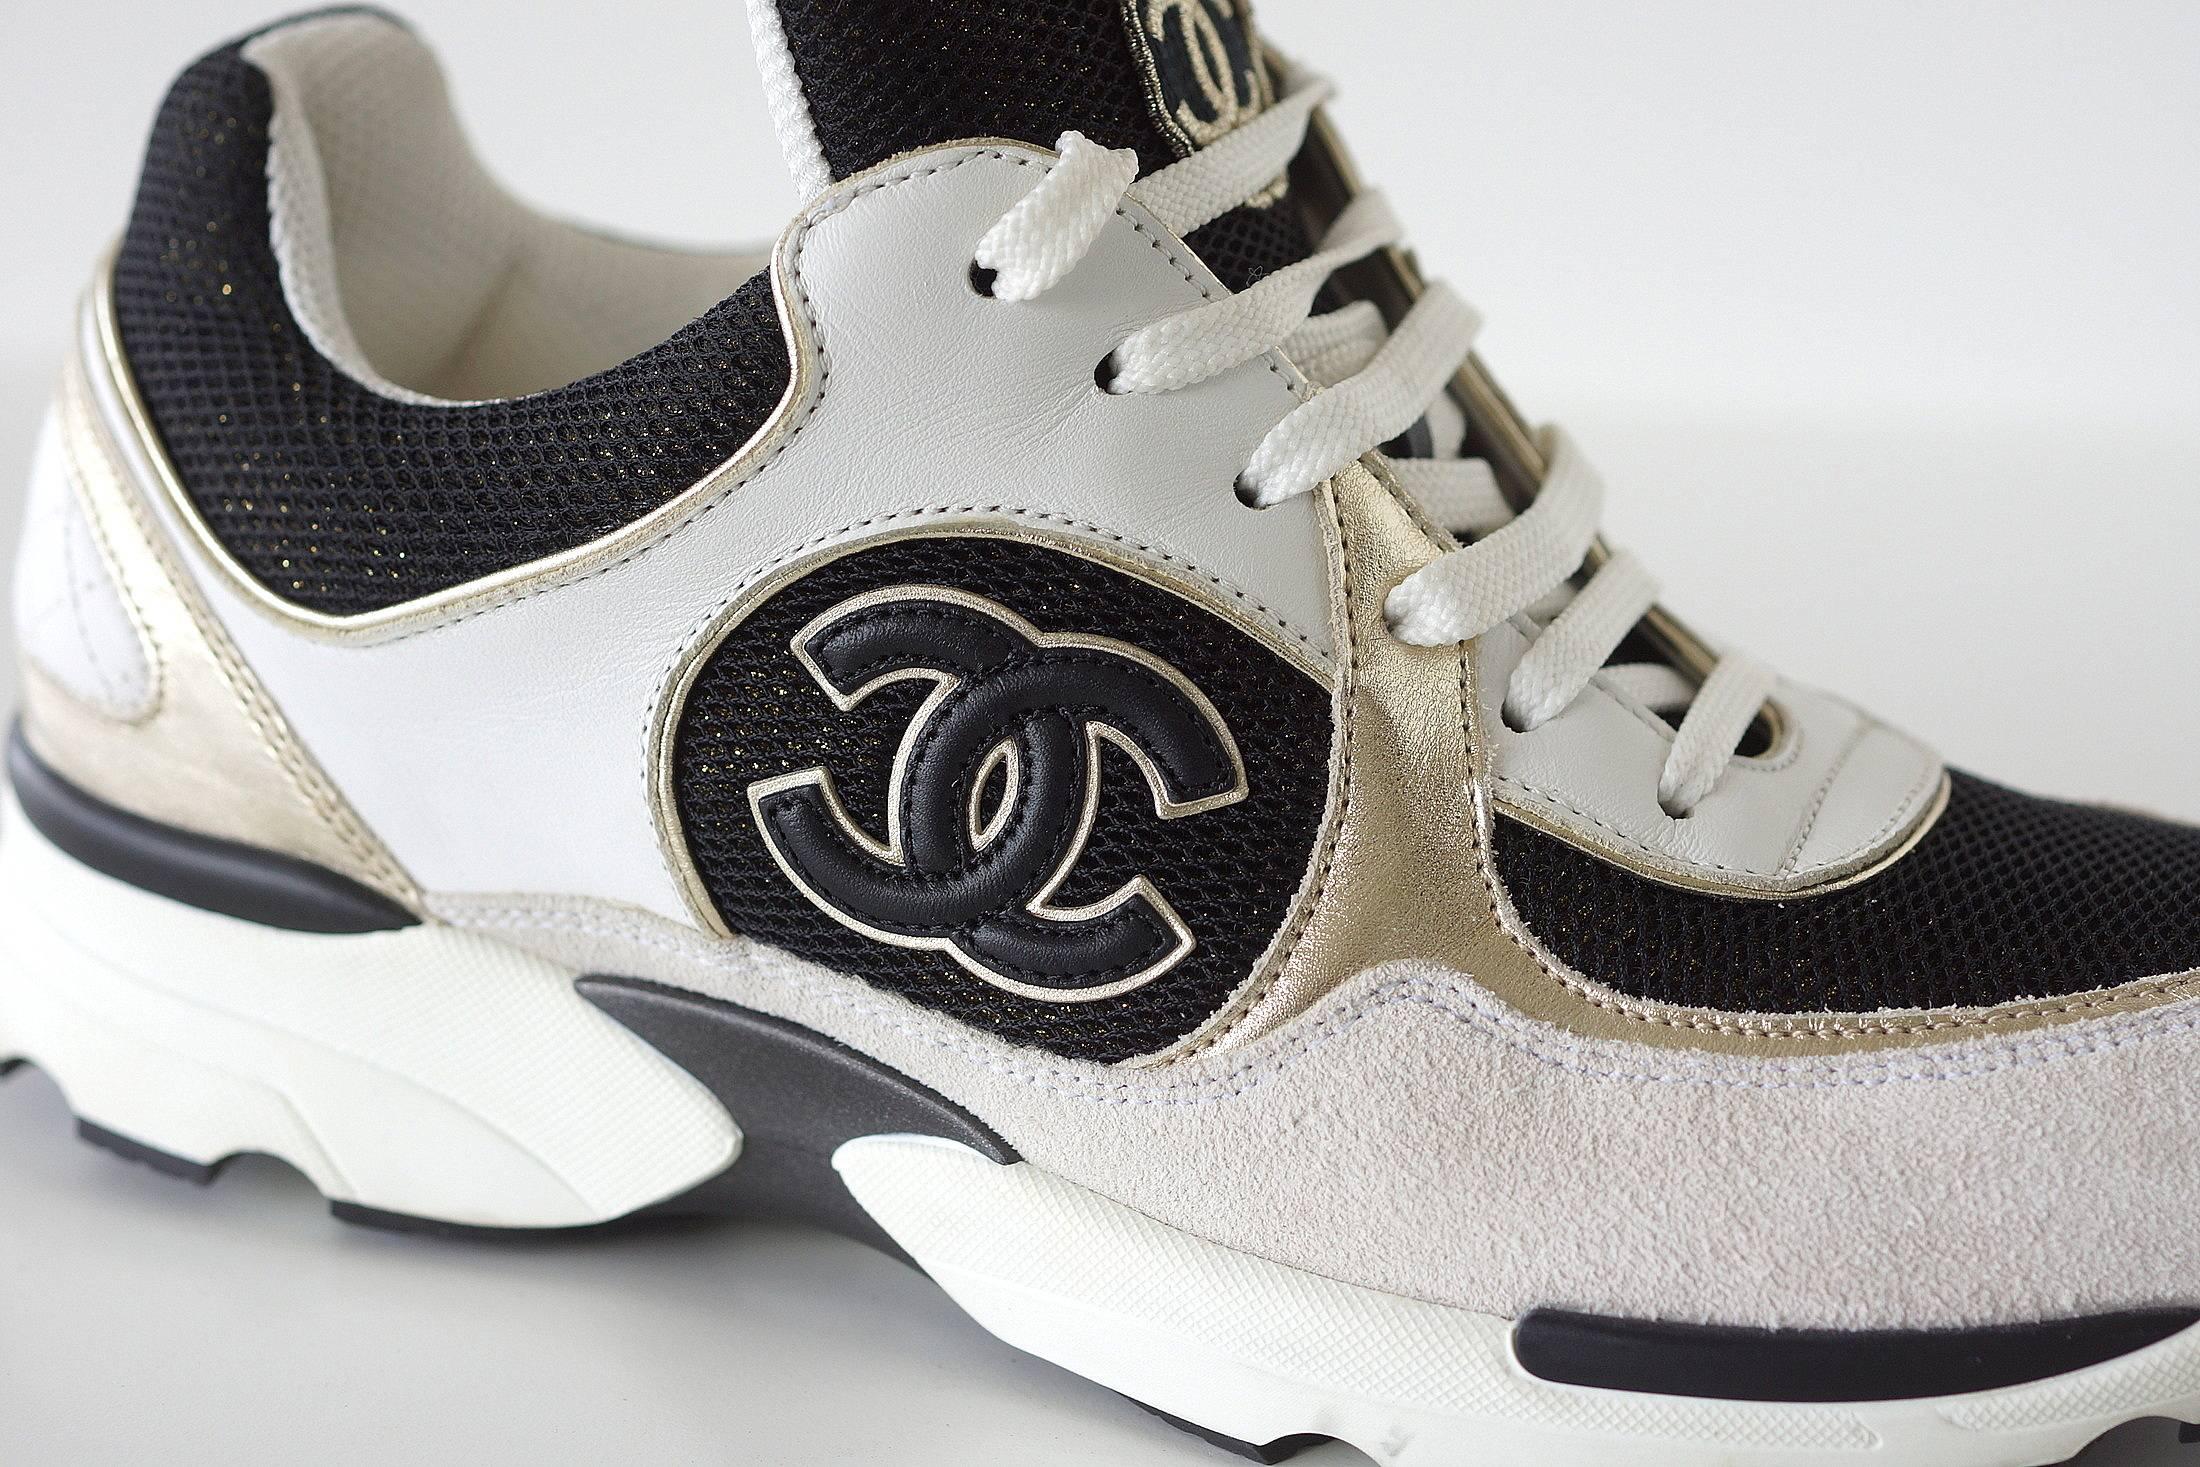 Guaranteed authentic CHANEL leather tennis sneaker in white, gold and black glitter effect textile. 
Black CC rimmed in gold on side of shoe.
Tongue has black CC rimmed in gold.
Black has gold metallic shimmer.
Signature white quilting at rear